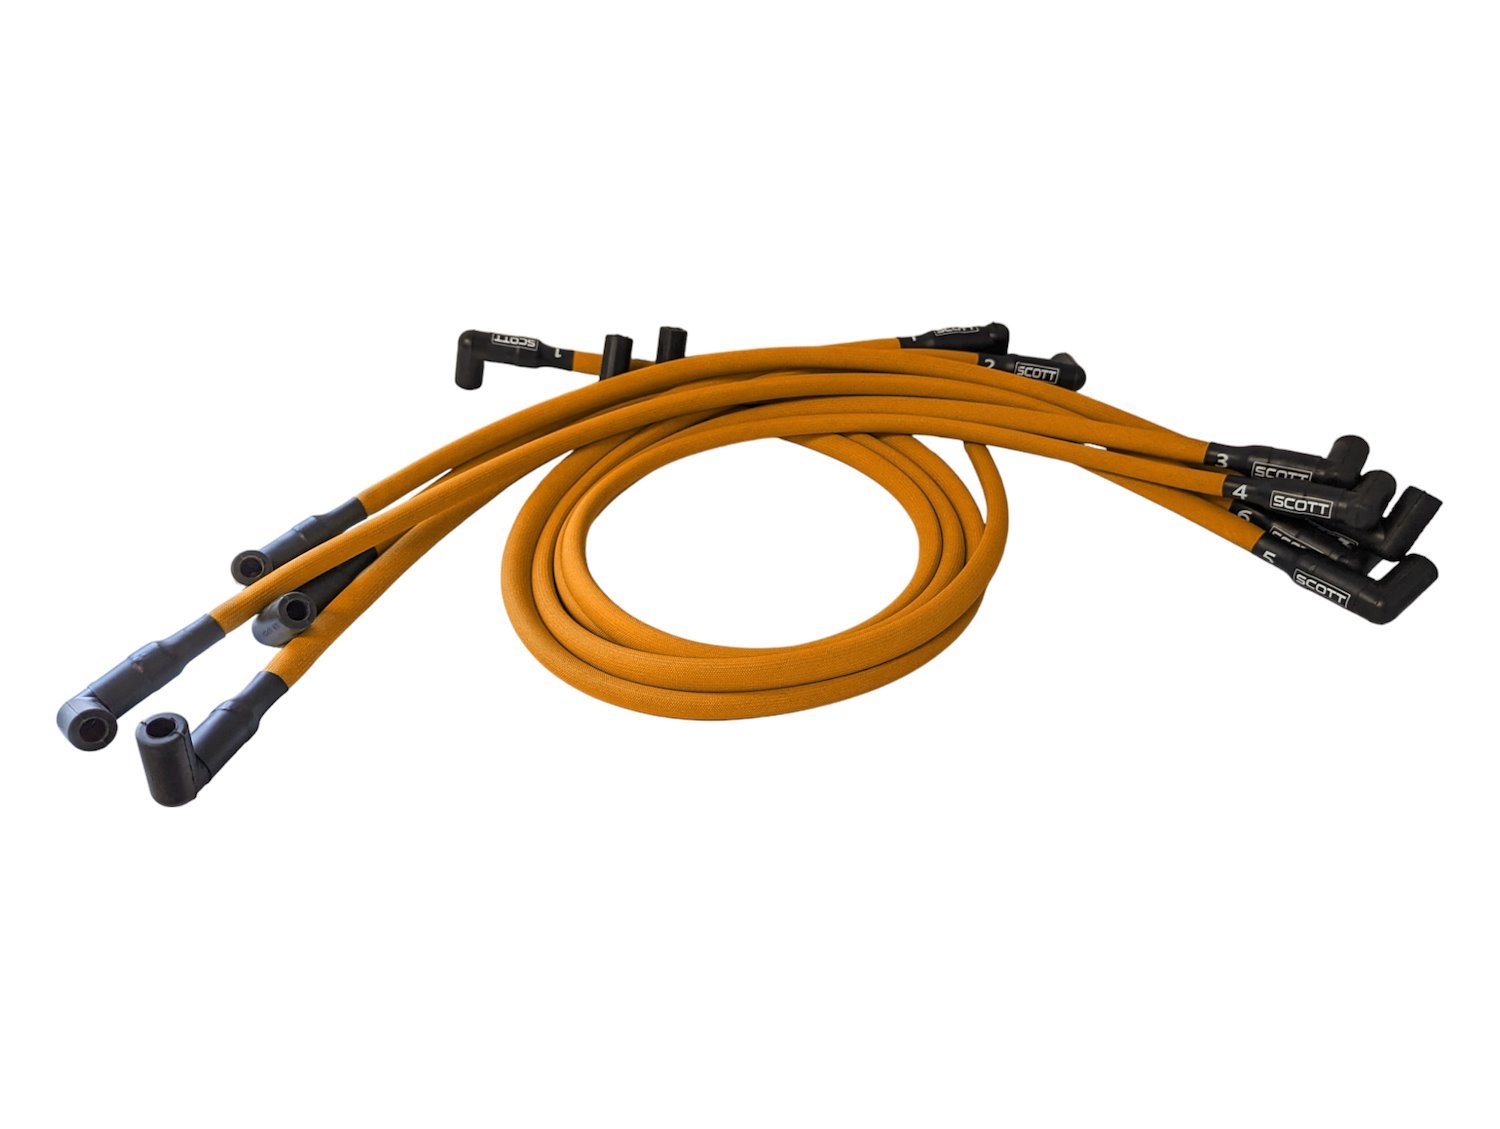 SPW300-PS-437-6 Super Mag Fiberglass-Oversleeved Spark Plug Wire Set for Small Block Chevy, Over & Under [Orange]